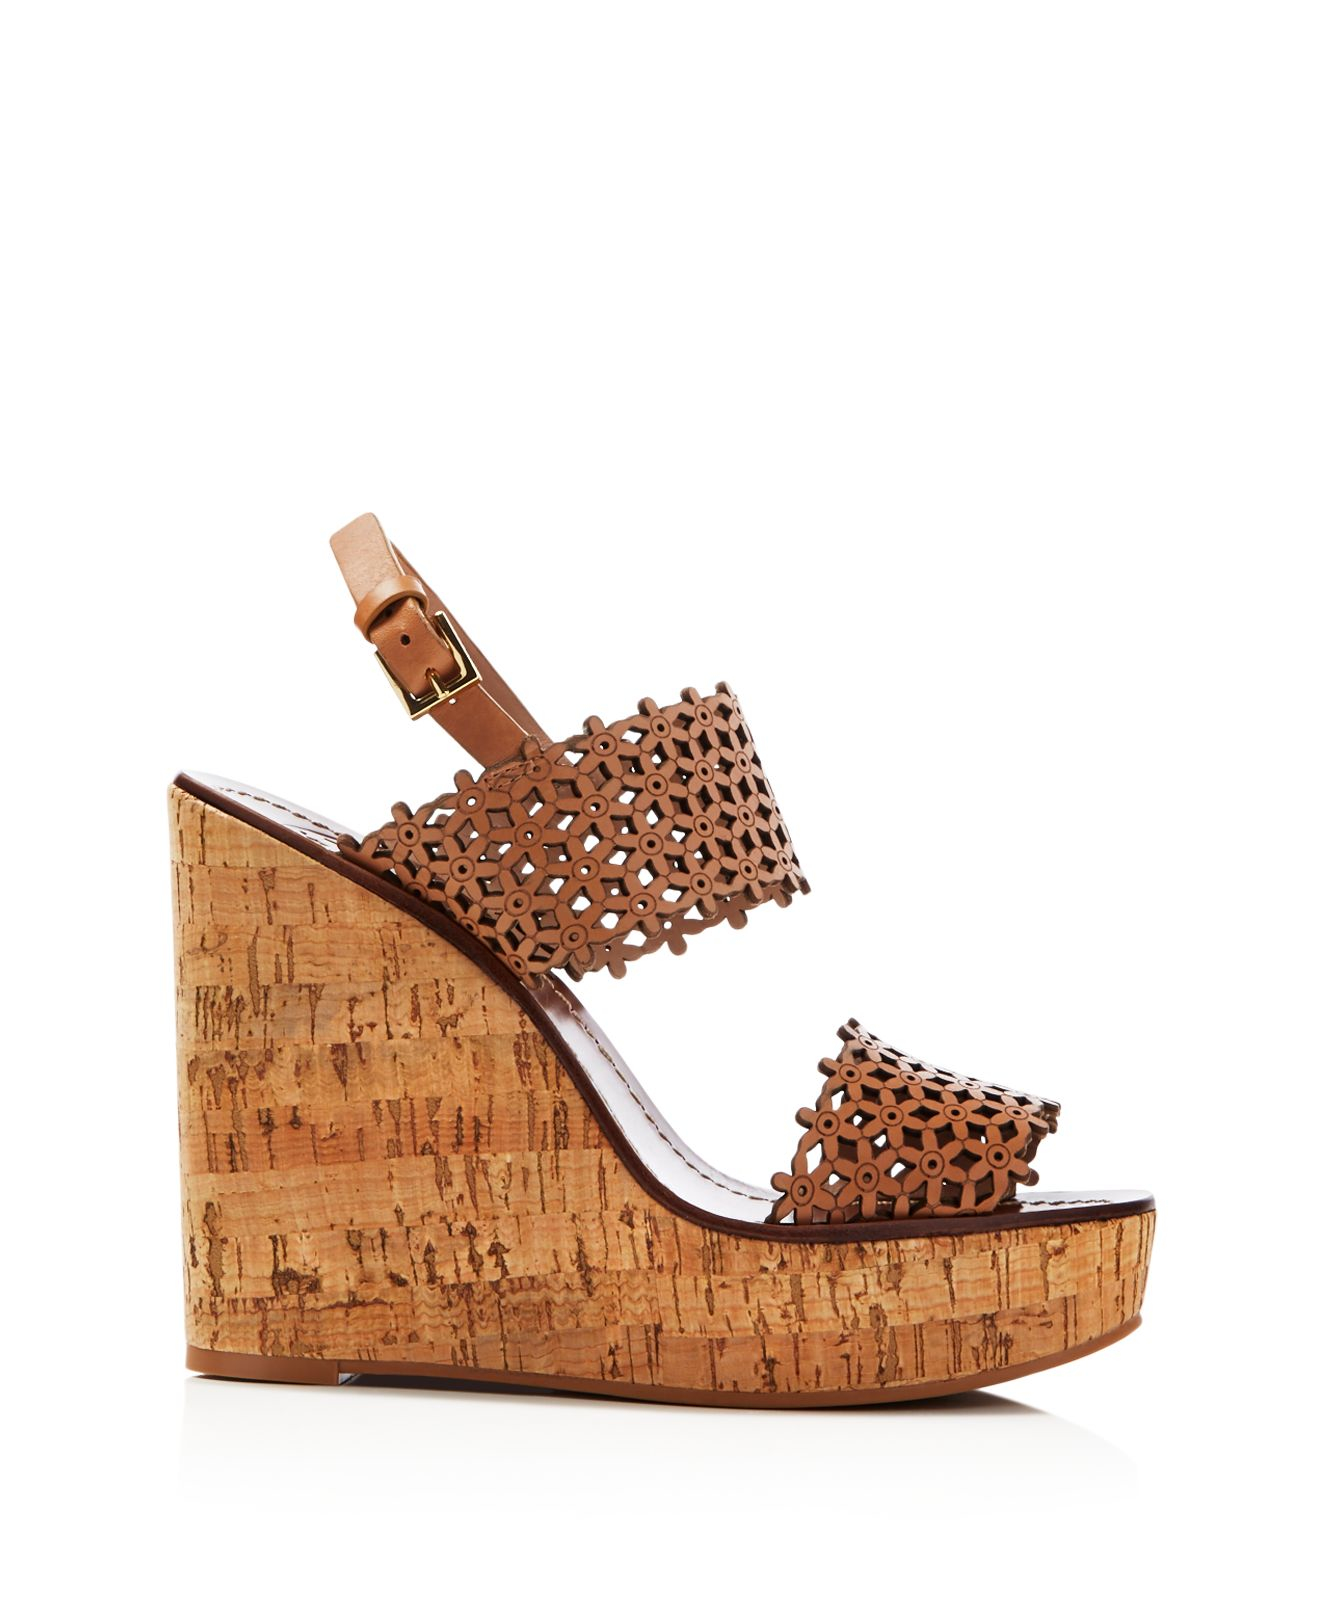 Tory Burch Floral Perforated Cork Wedge Sandals in Brown - Lyst